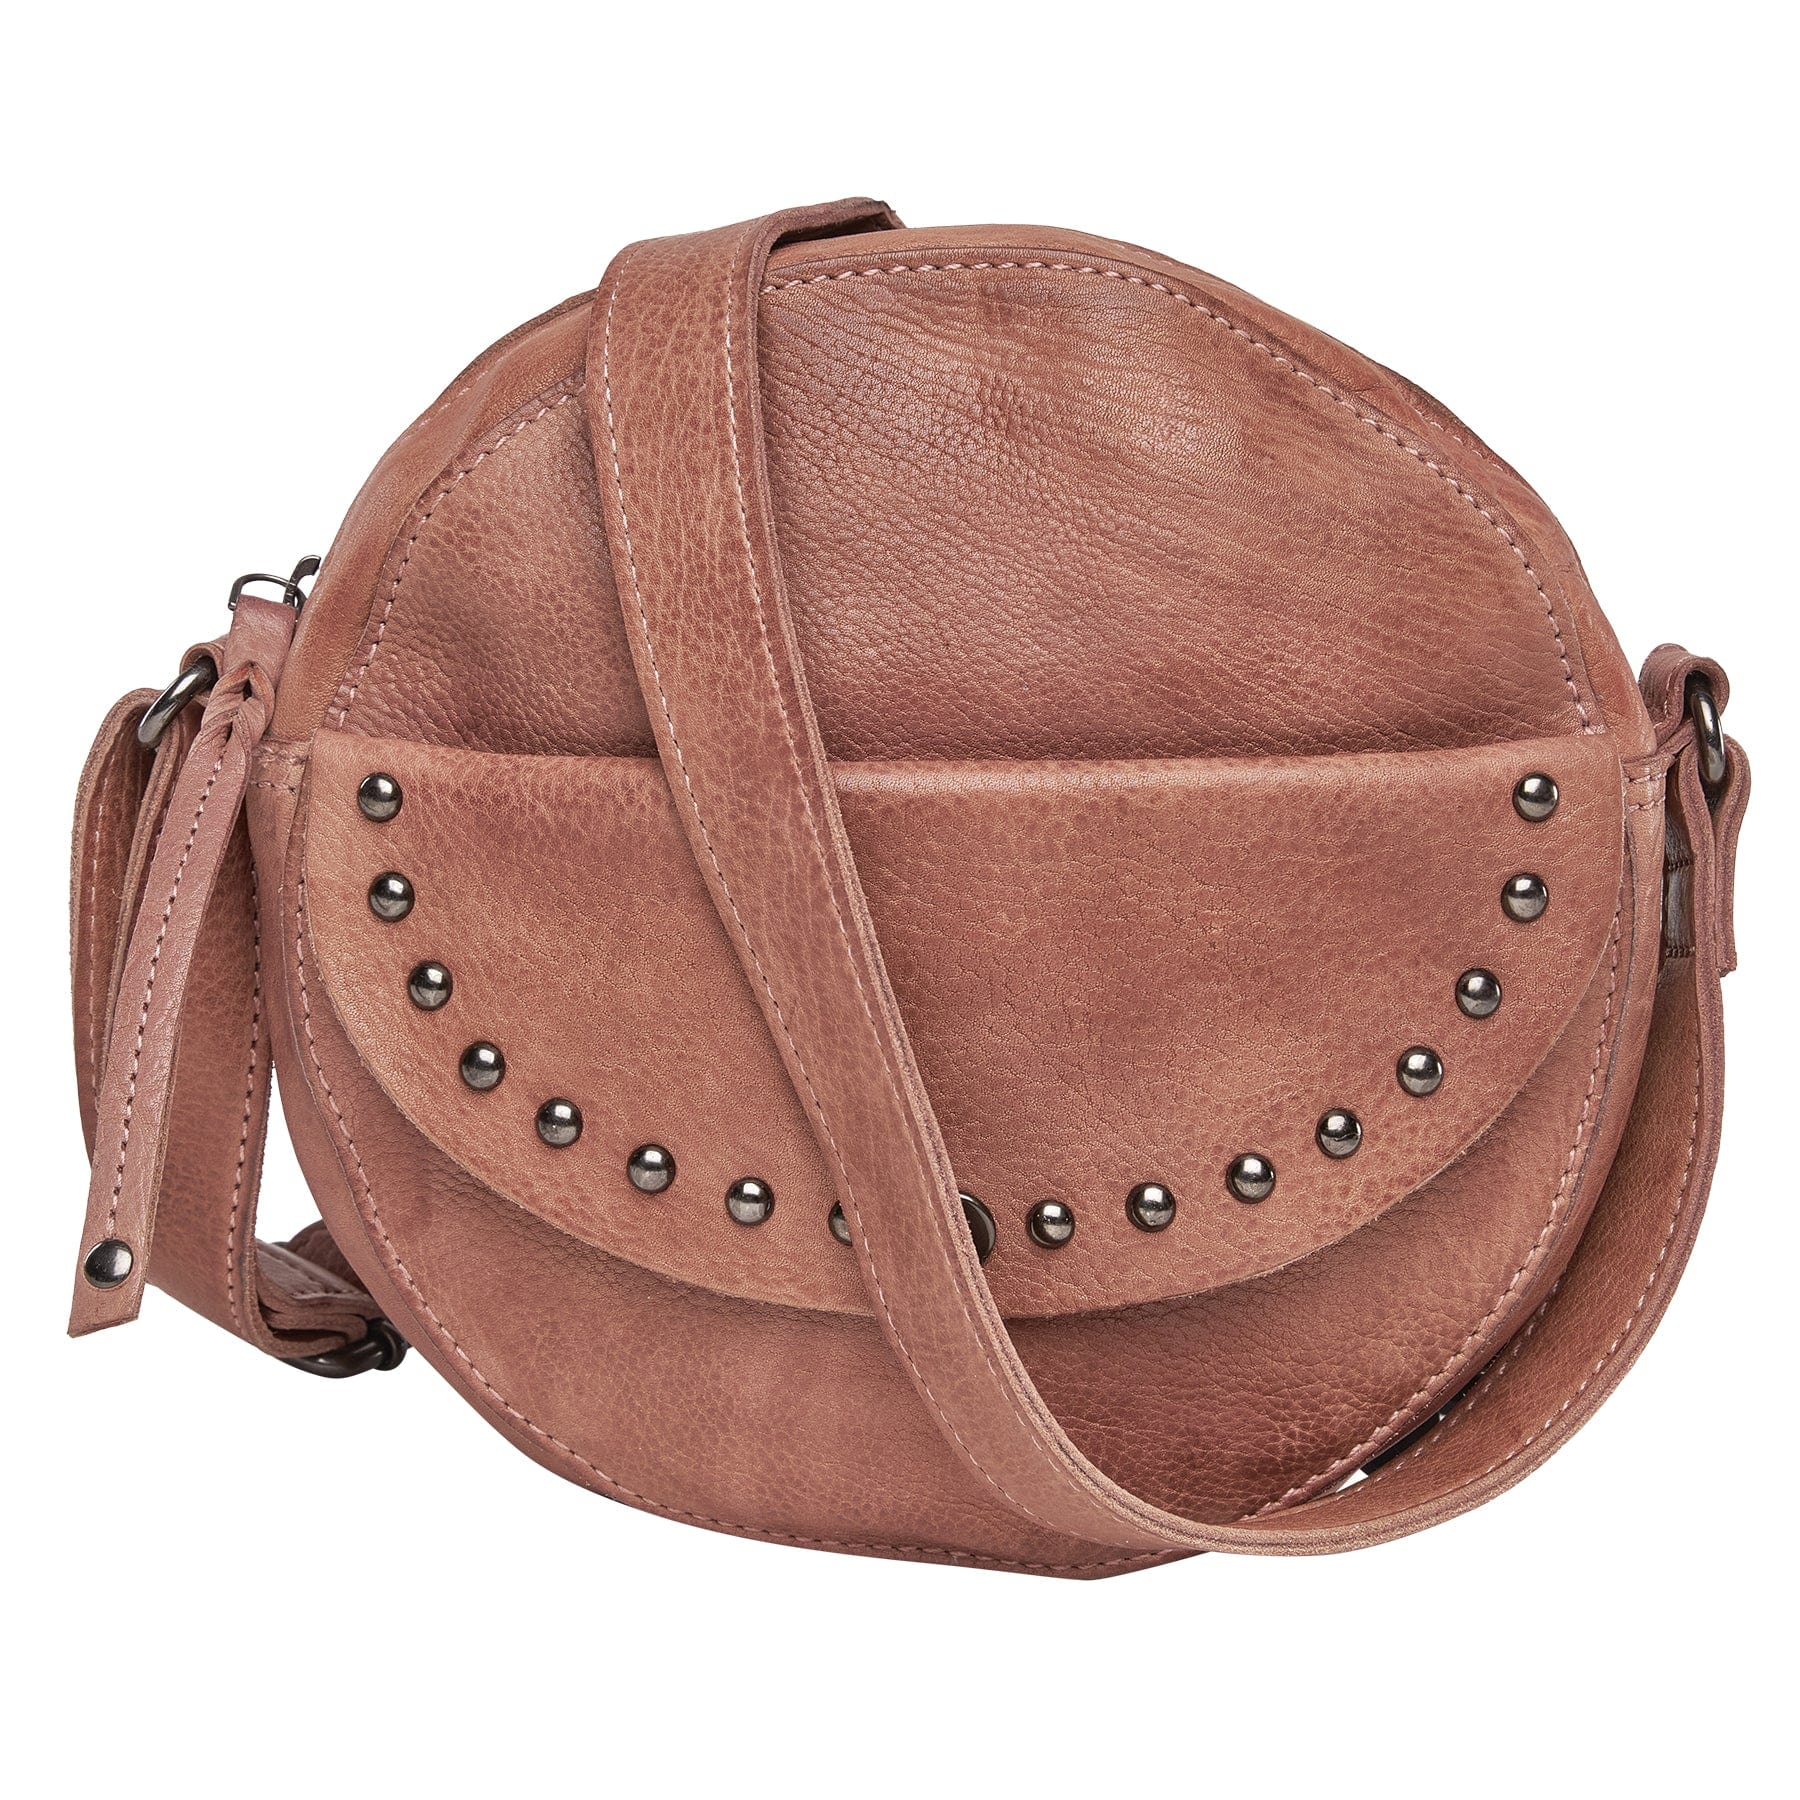 Concealed Carry Mia Crossbody Purse -  Locking Zippers and Universal Holster Tactical Bag for Women  -  YKK Locking Gun Purse -  Concealment Pocket -  Pistol Women's Purse Crossbody -  Concealed Carry Purse -  most popular crossbody Purse -  crossbody handgun Purse -  crossbody bags for everyday use -  Lady Conceal -  Unique Hide Purse -  Locking YKK Purse -  Fanny Pack for Gun and Pistol -  Easy CCW -  Fast Draw Bag -  Secure Gun Bag